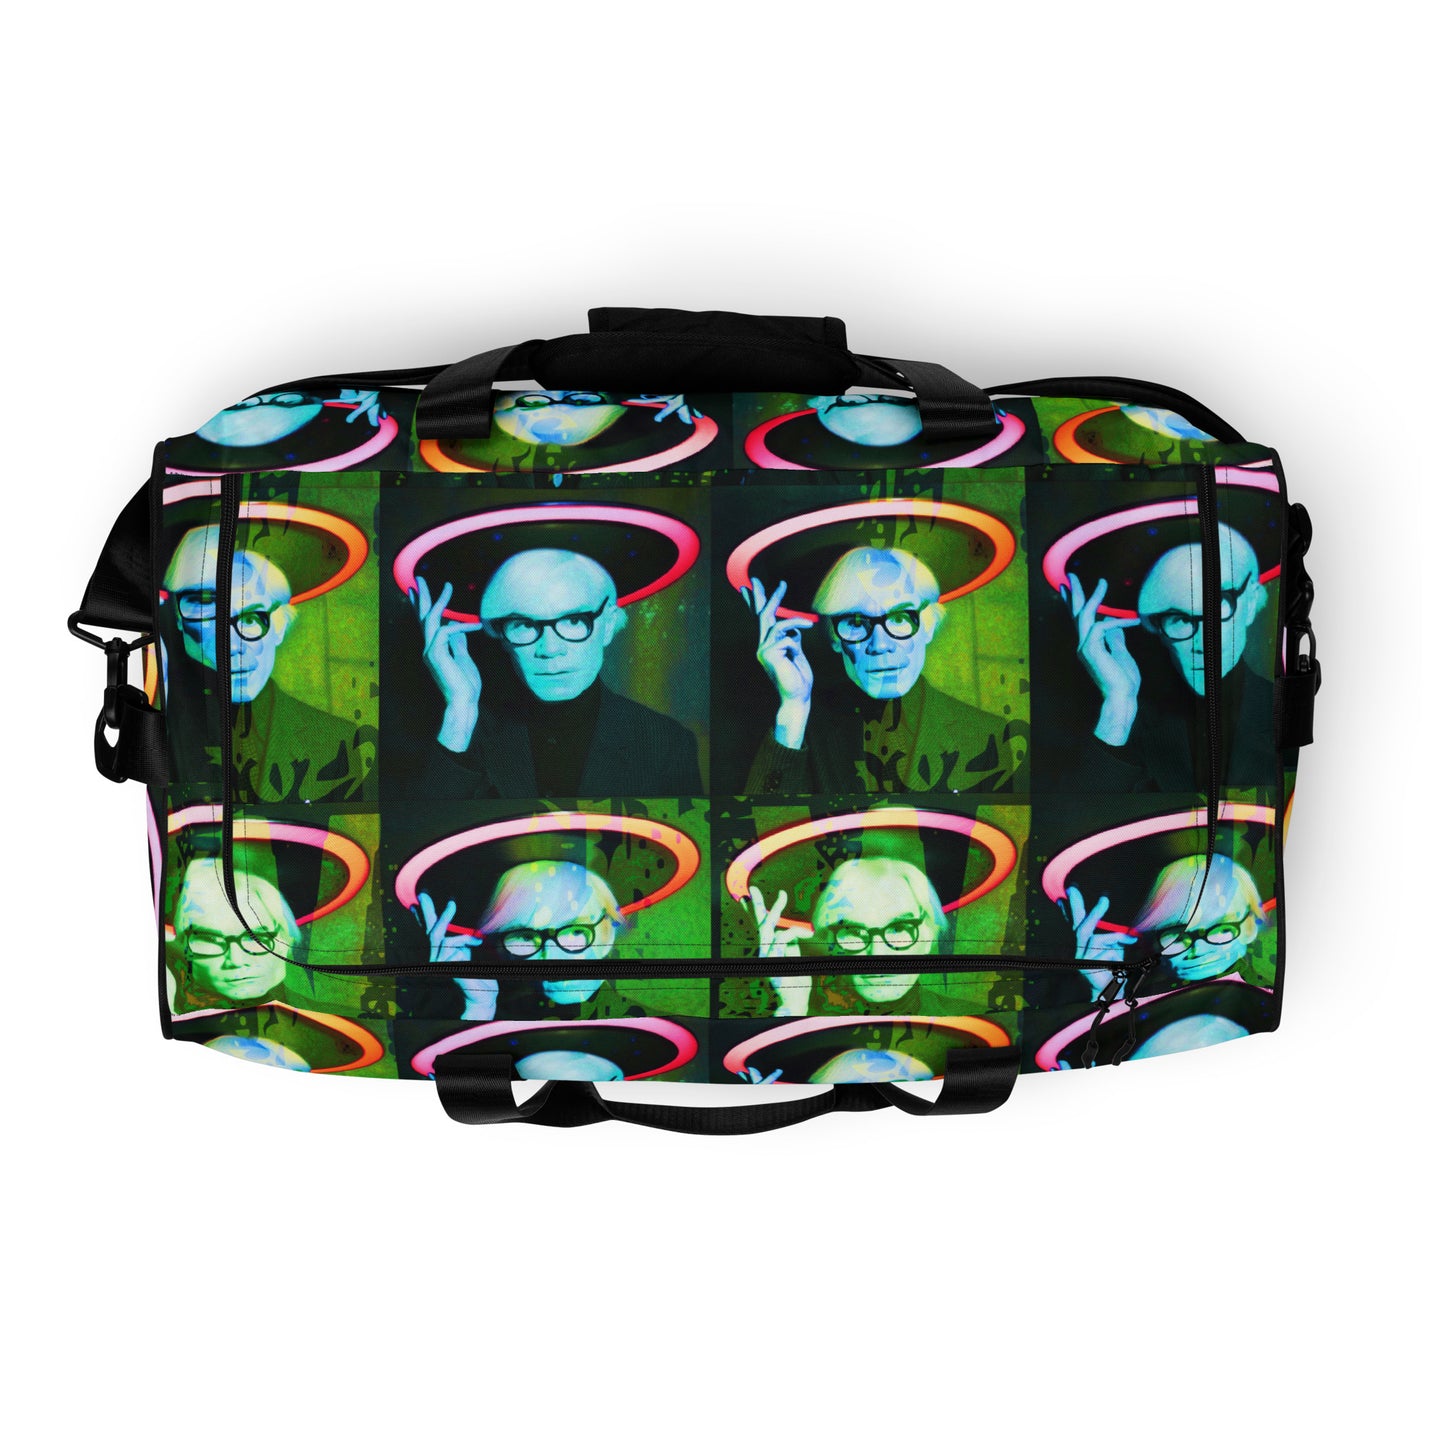 AndEEE UFO 01 Duffle bag - For your next trip to Portugal